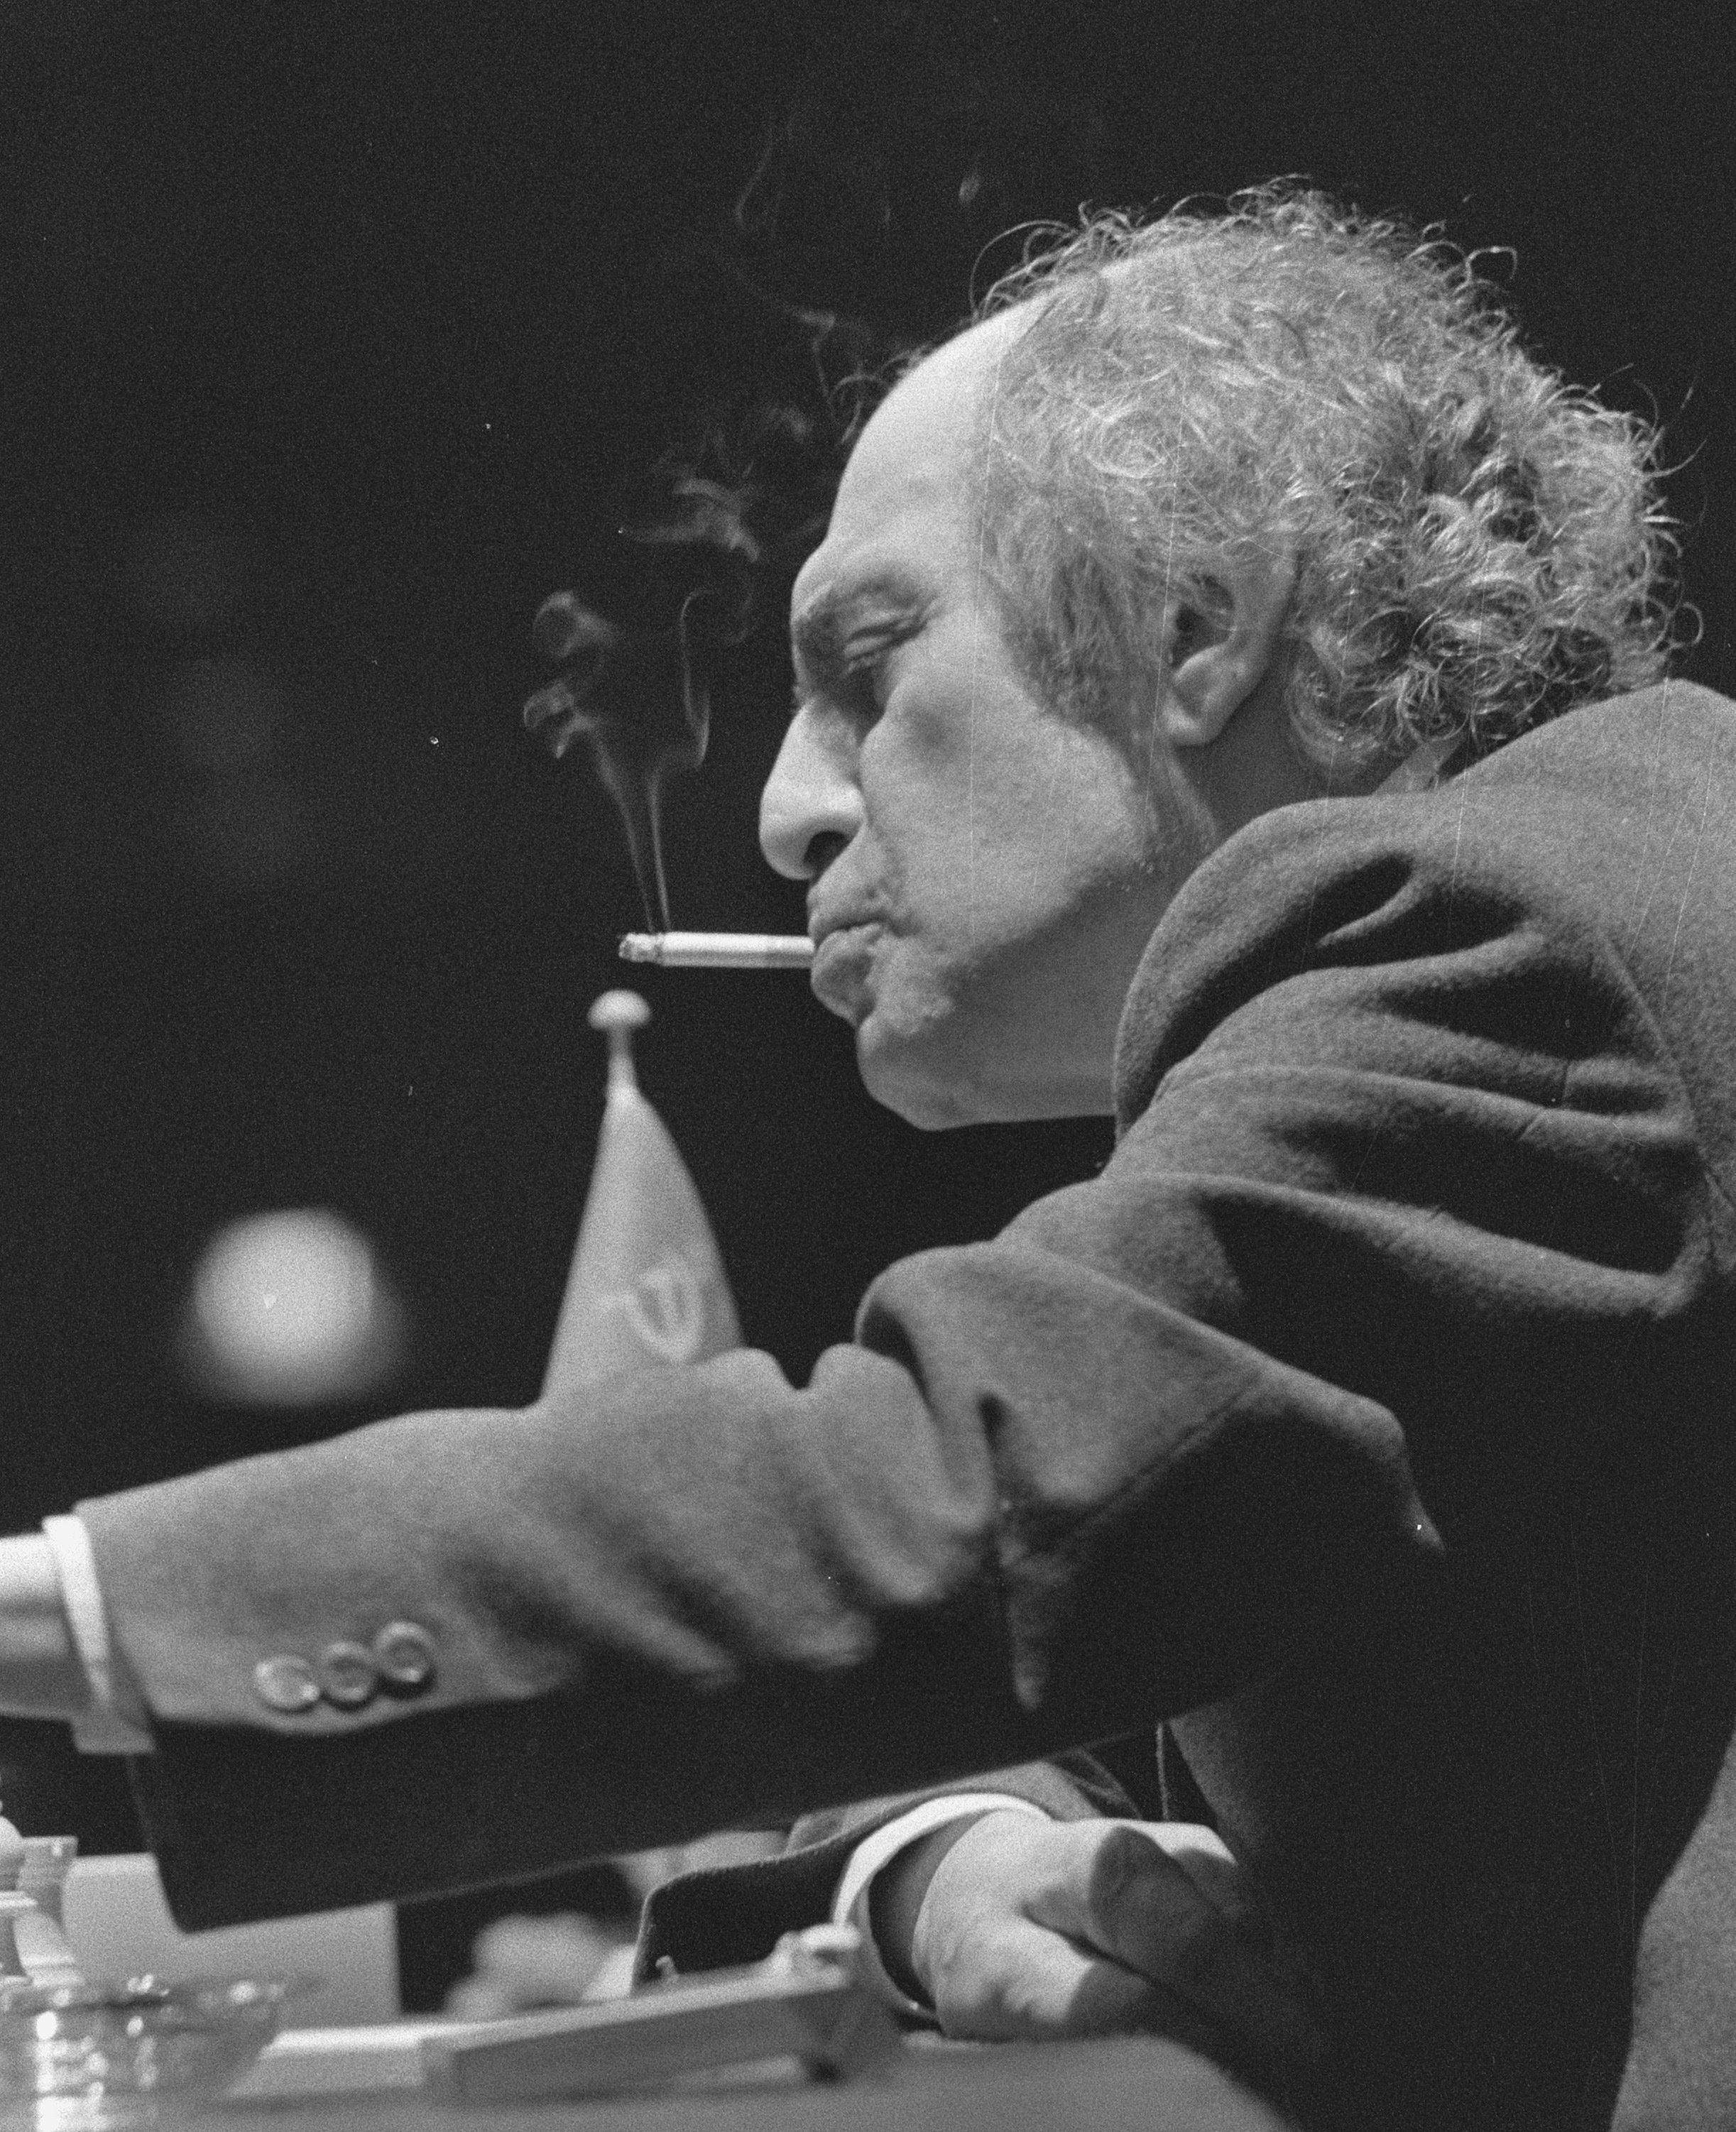 Tal is a magician, Mikhail tal at his best